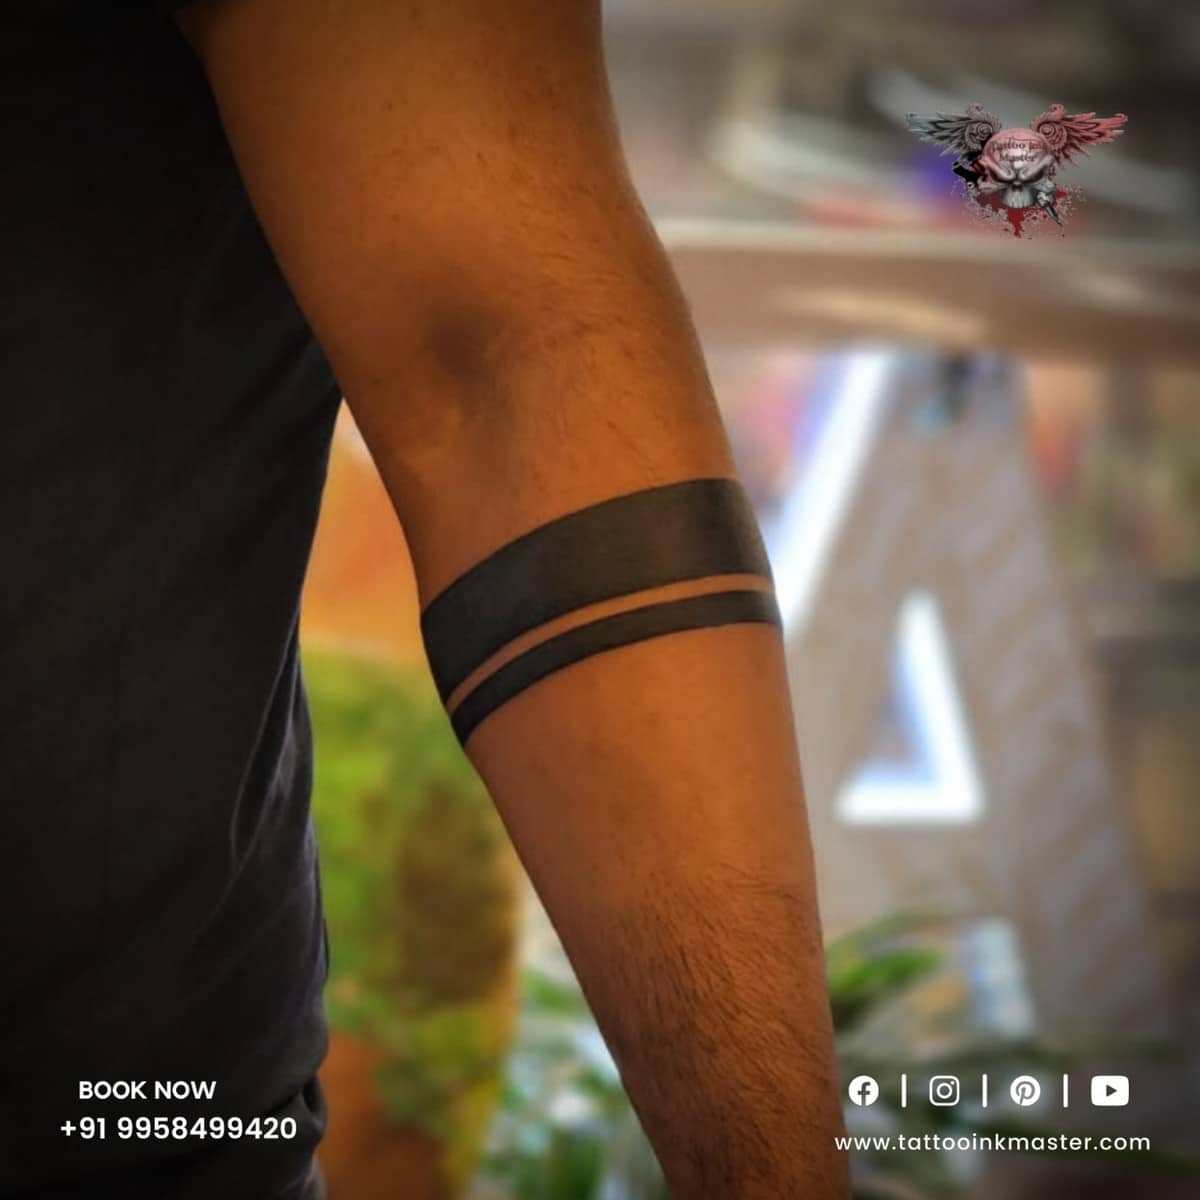 Simple Two-Band Tattoo Design | Tattoo Ink Master